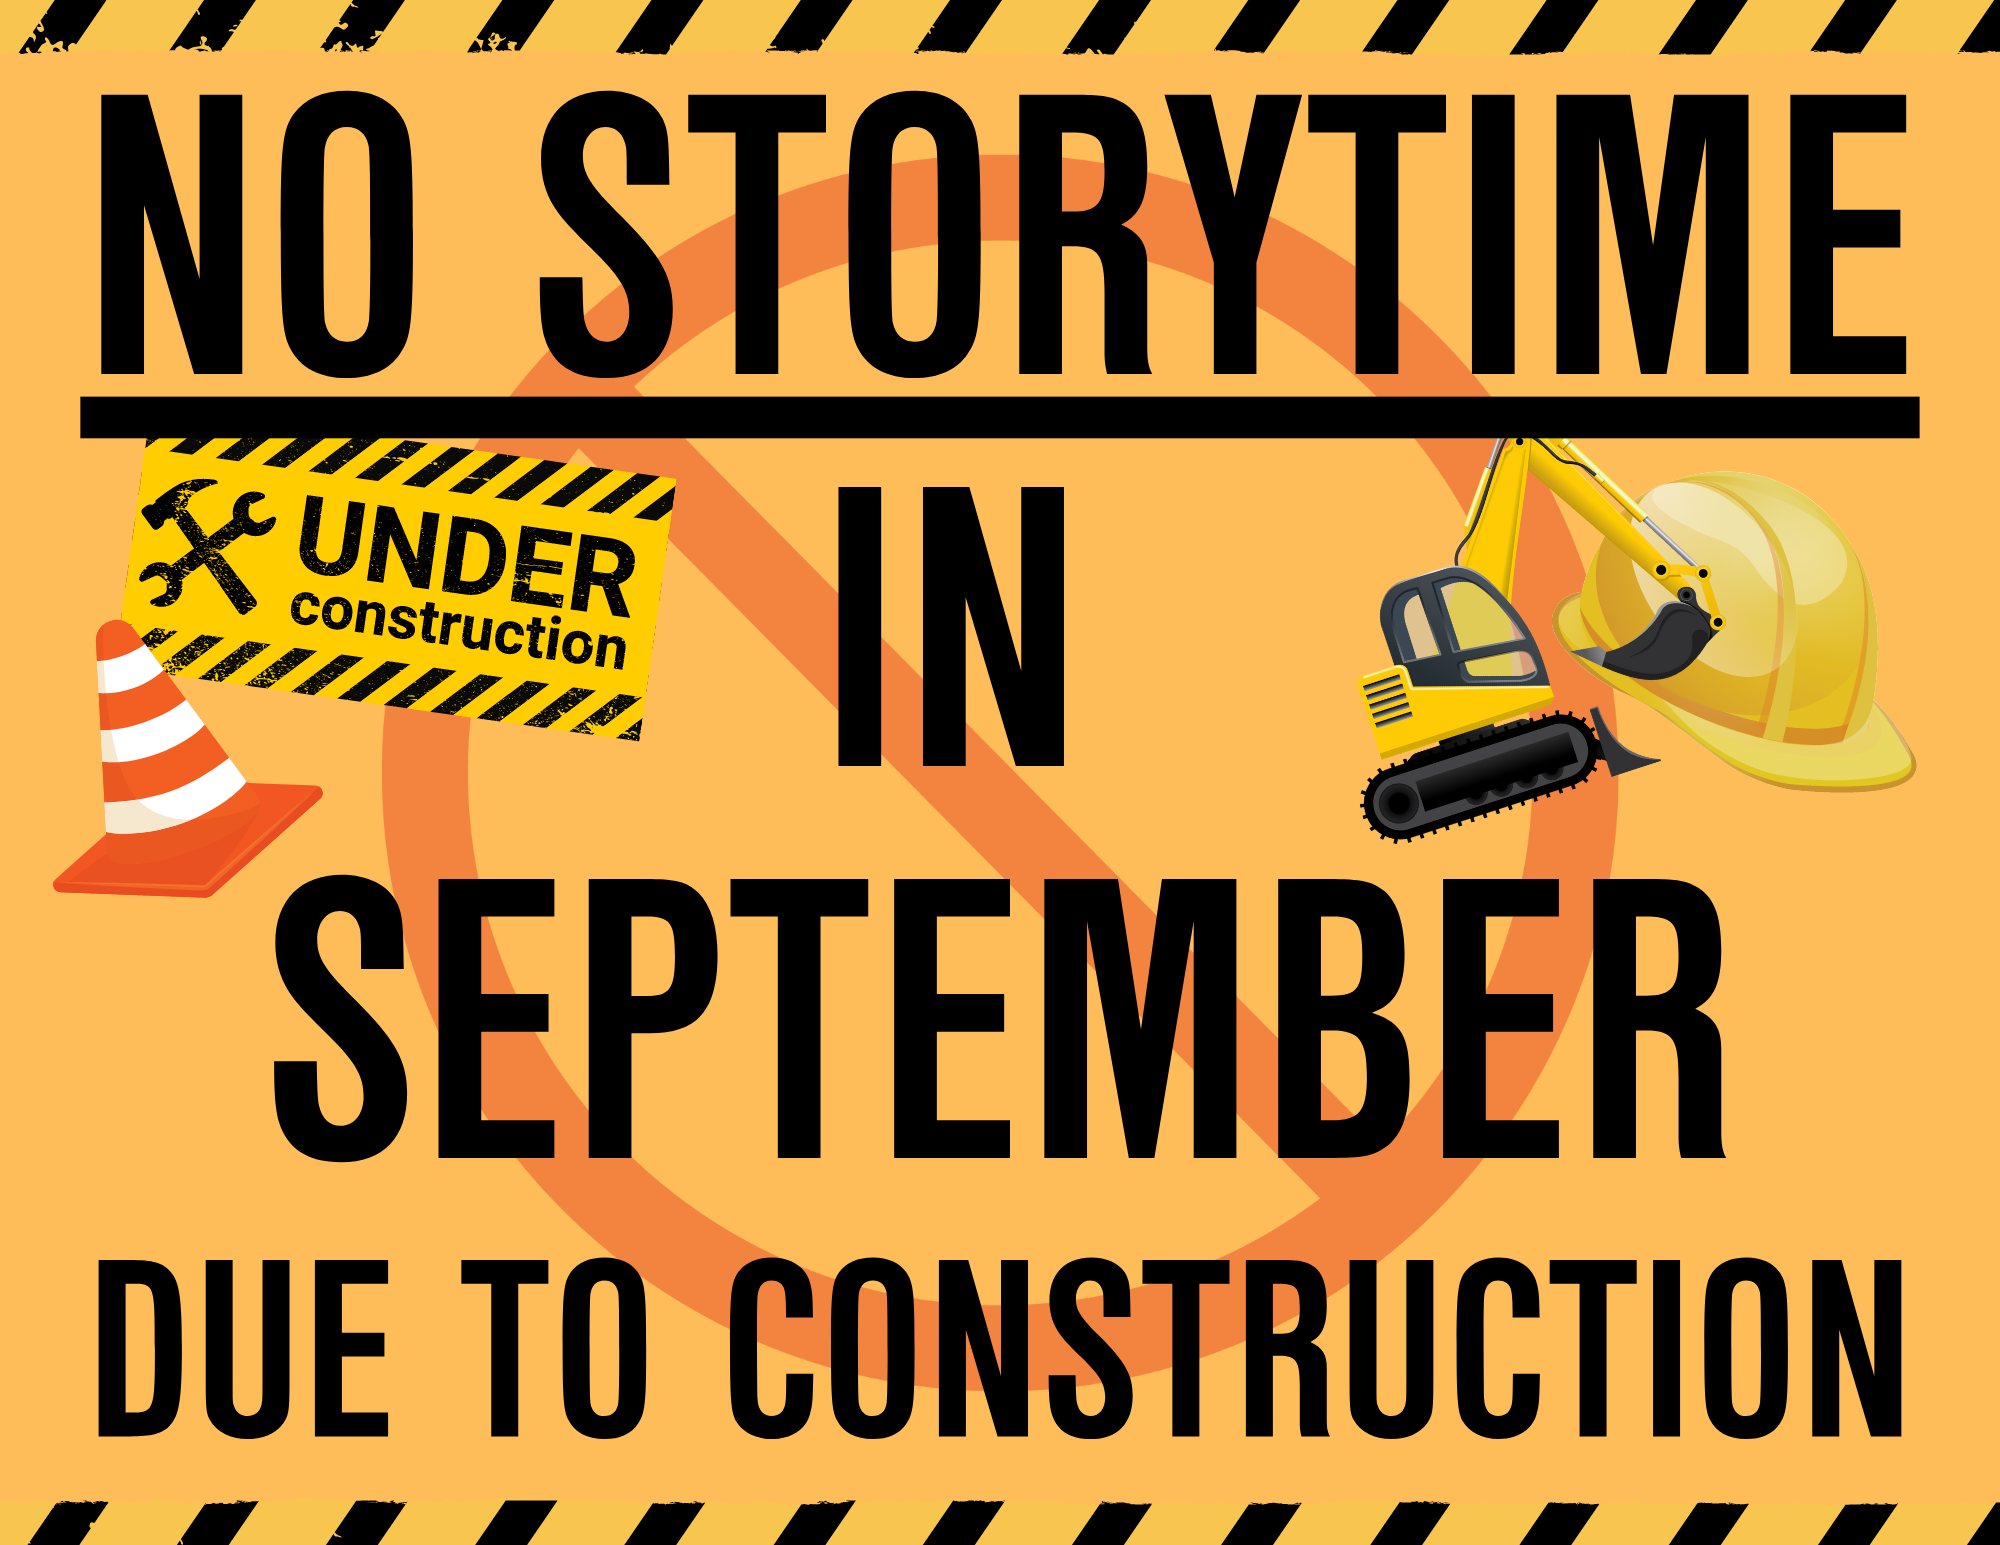 No Storytime in September Due to Contruction